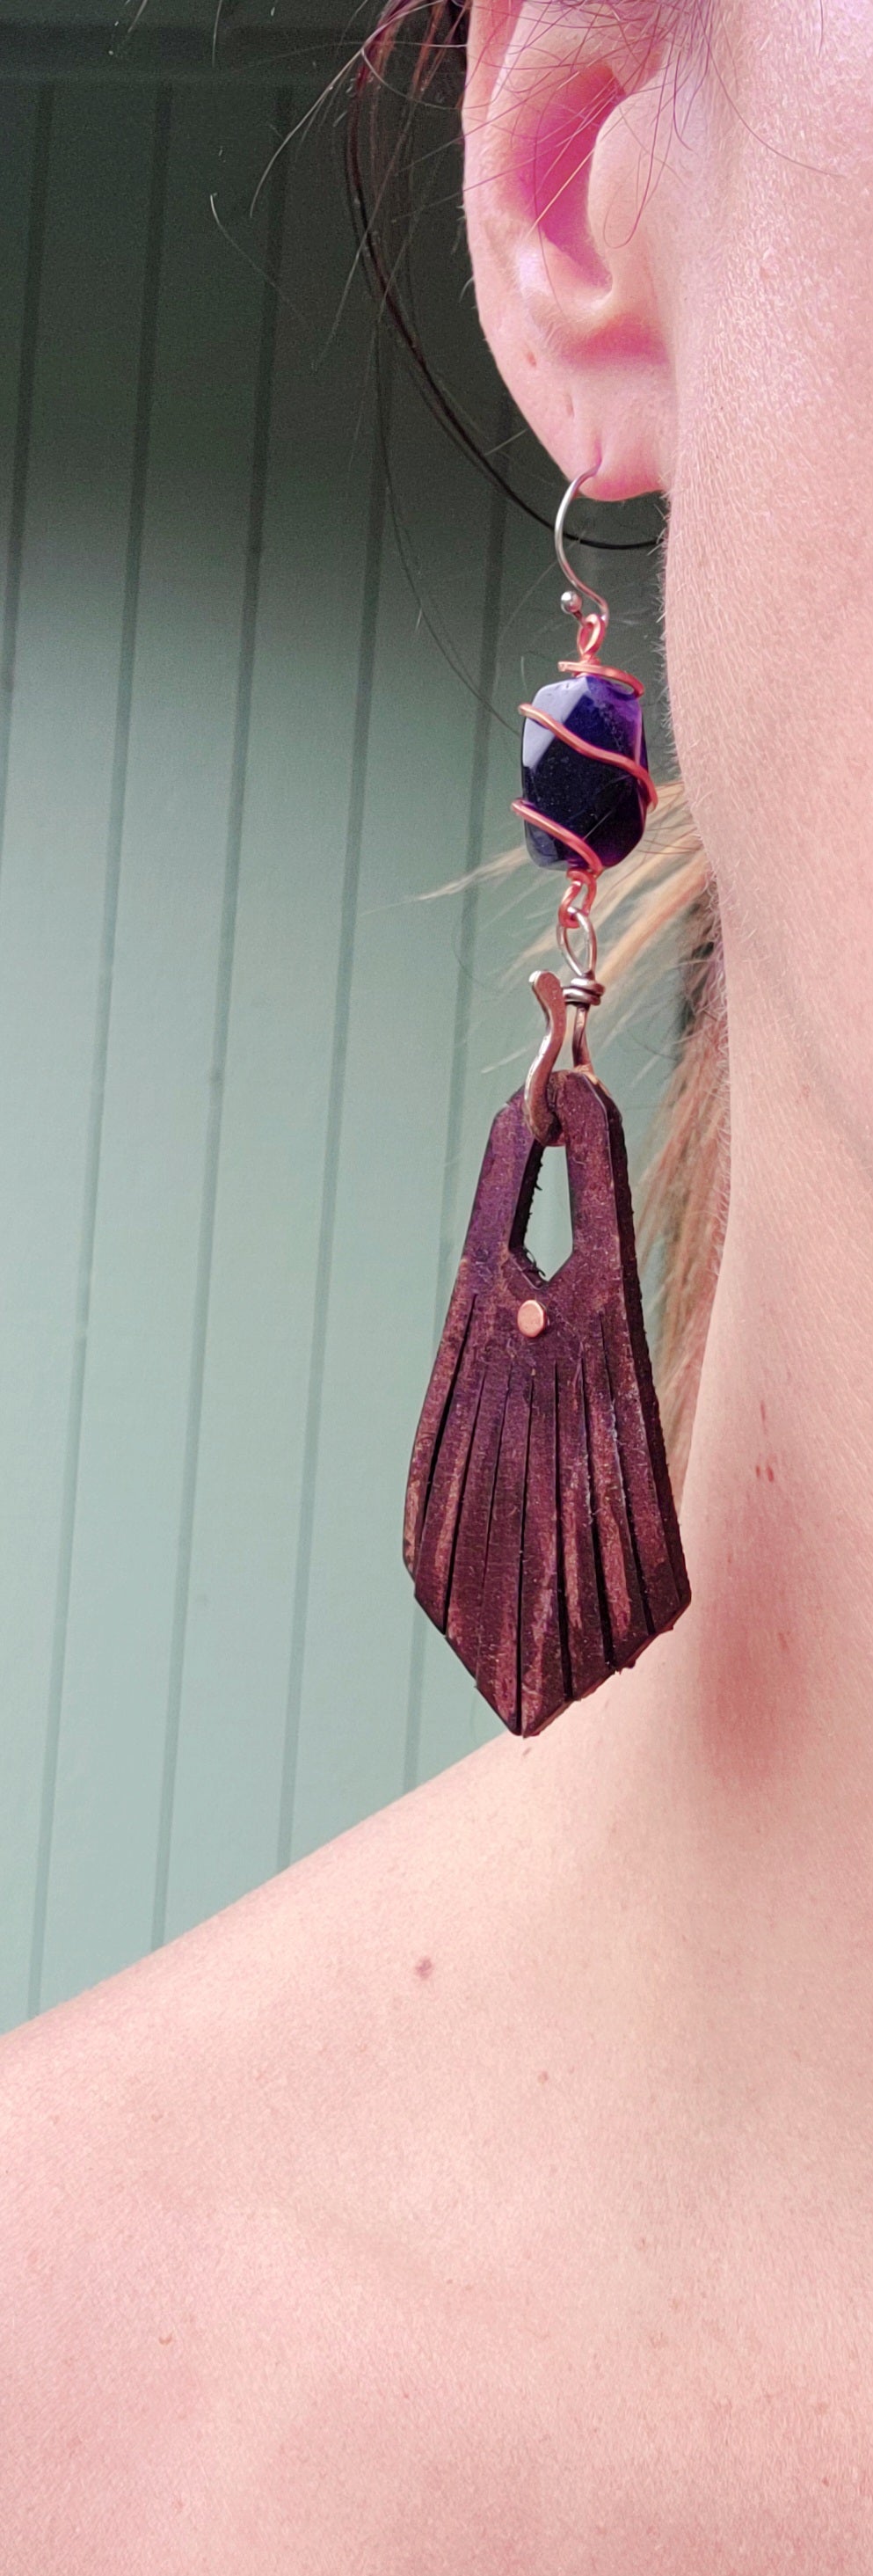 Earrings - Leather and Amethyst